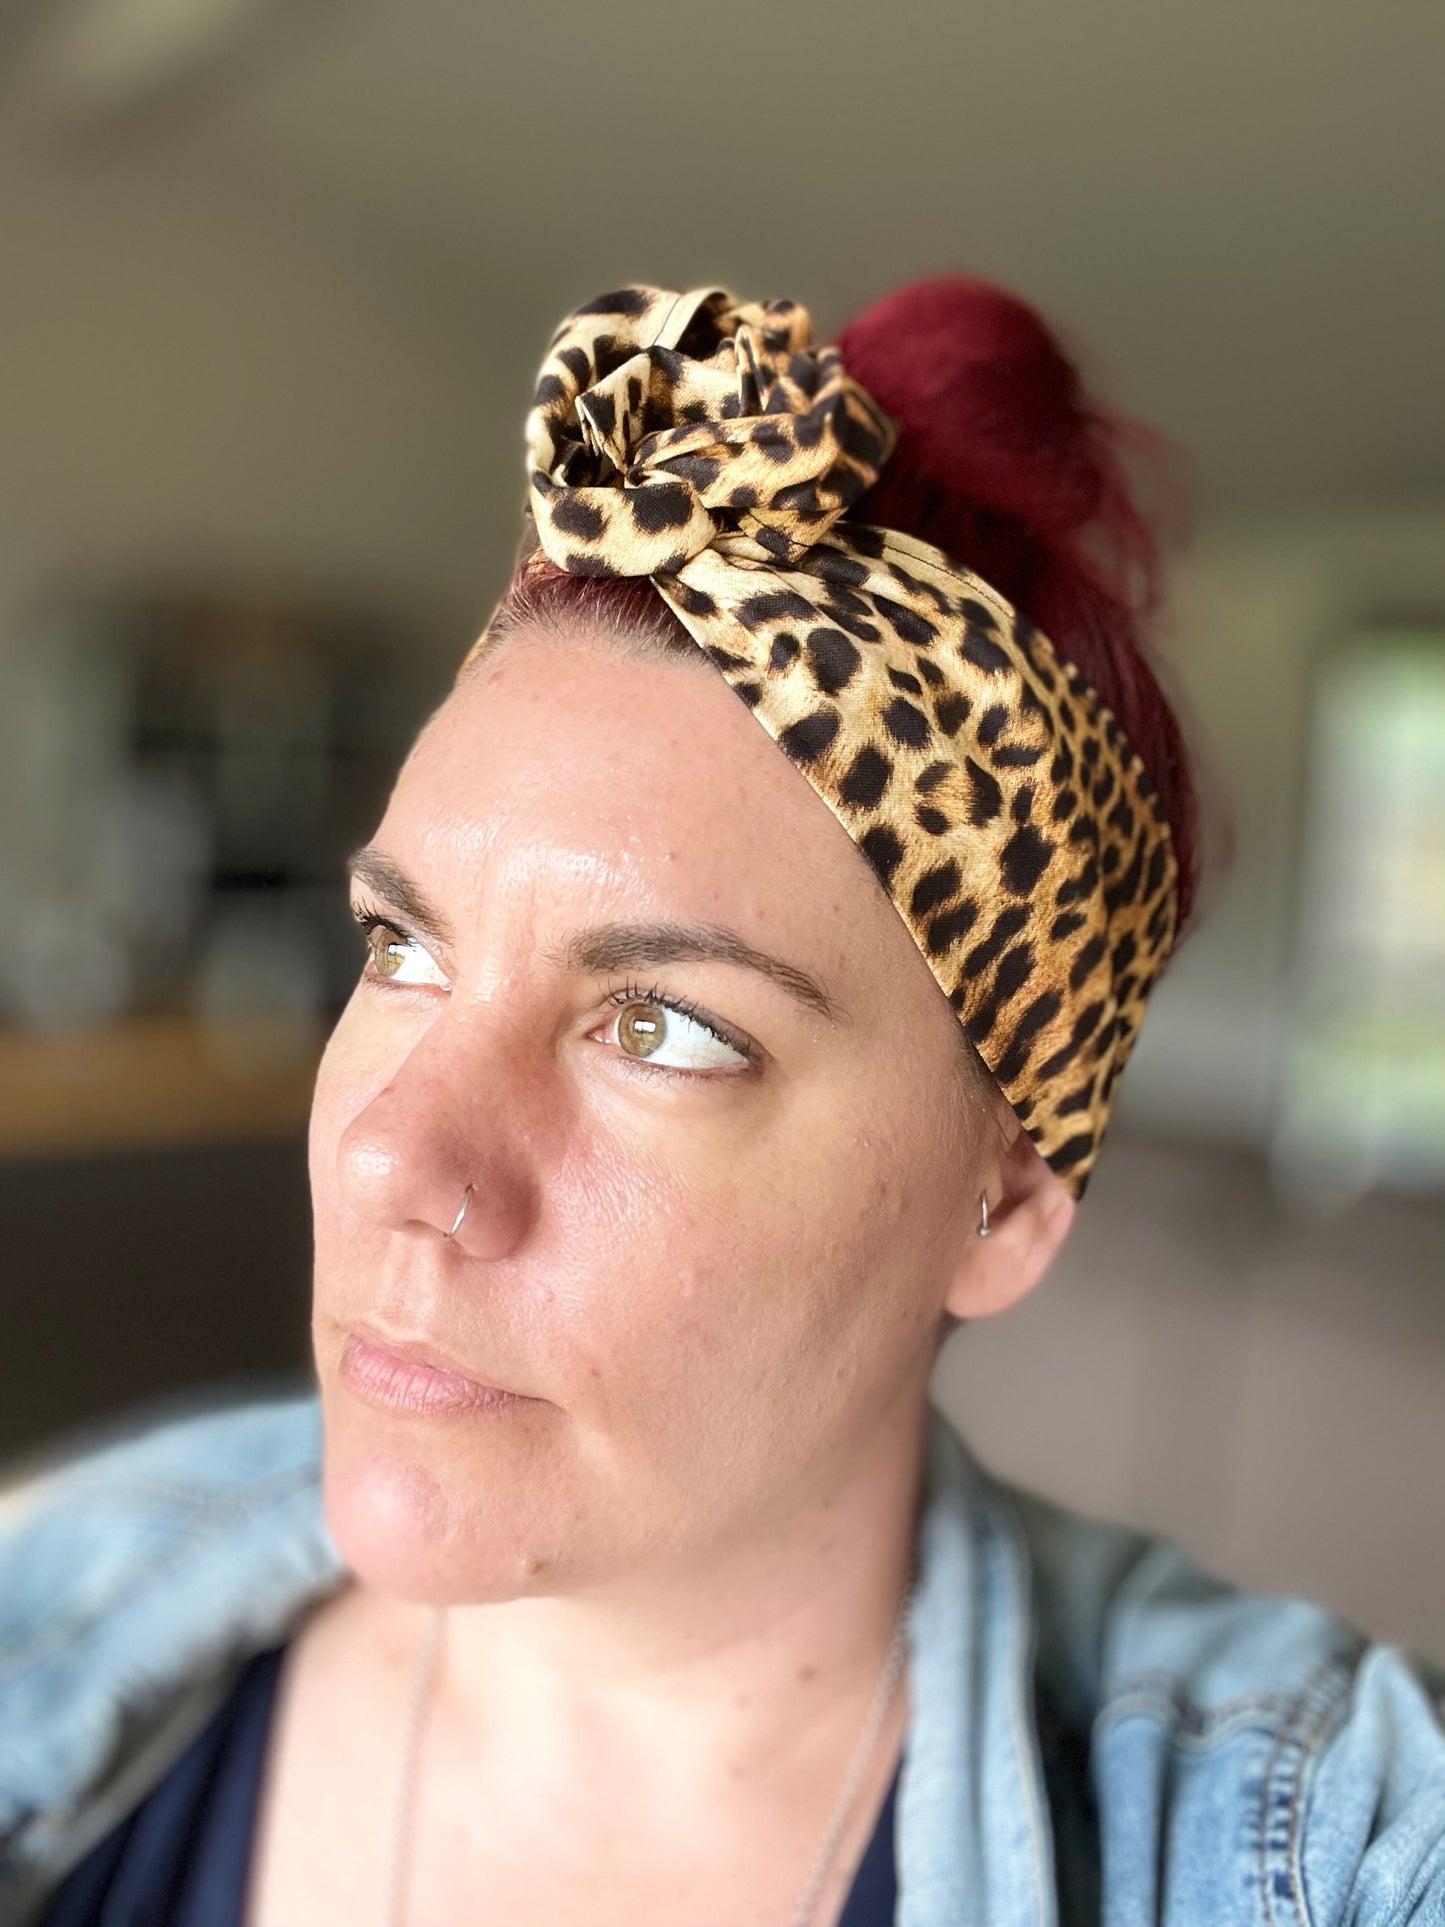 True Leopard Print Boho Wire Headband - Bae Bands Australia Twist Bow Wire Headband allows for your headband to stay in place all day with no headaches,